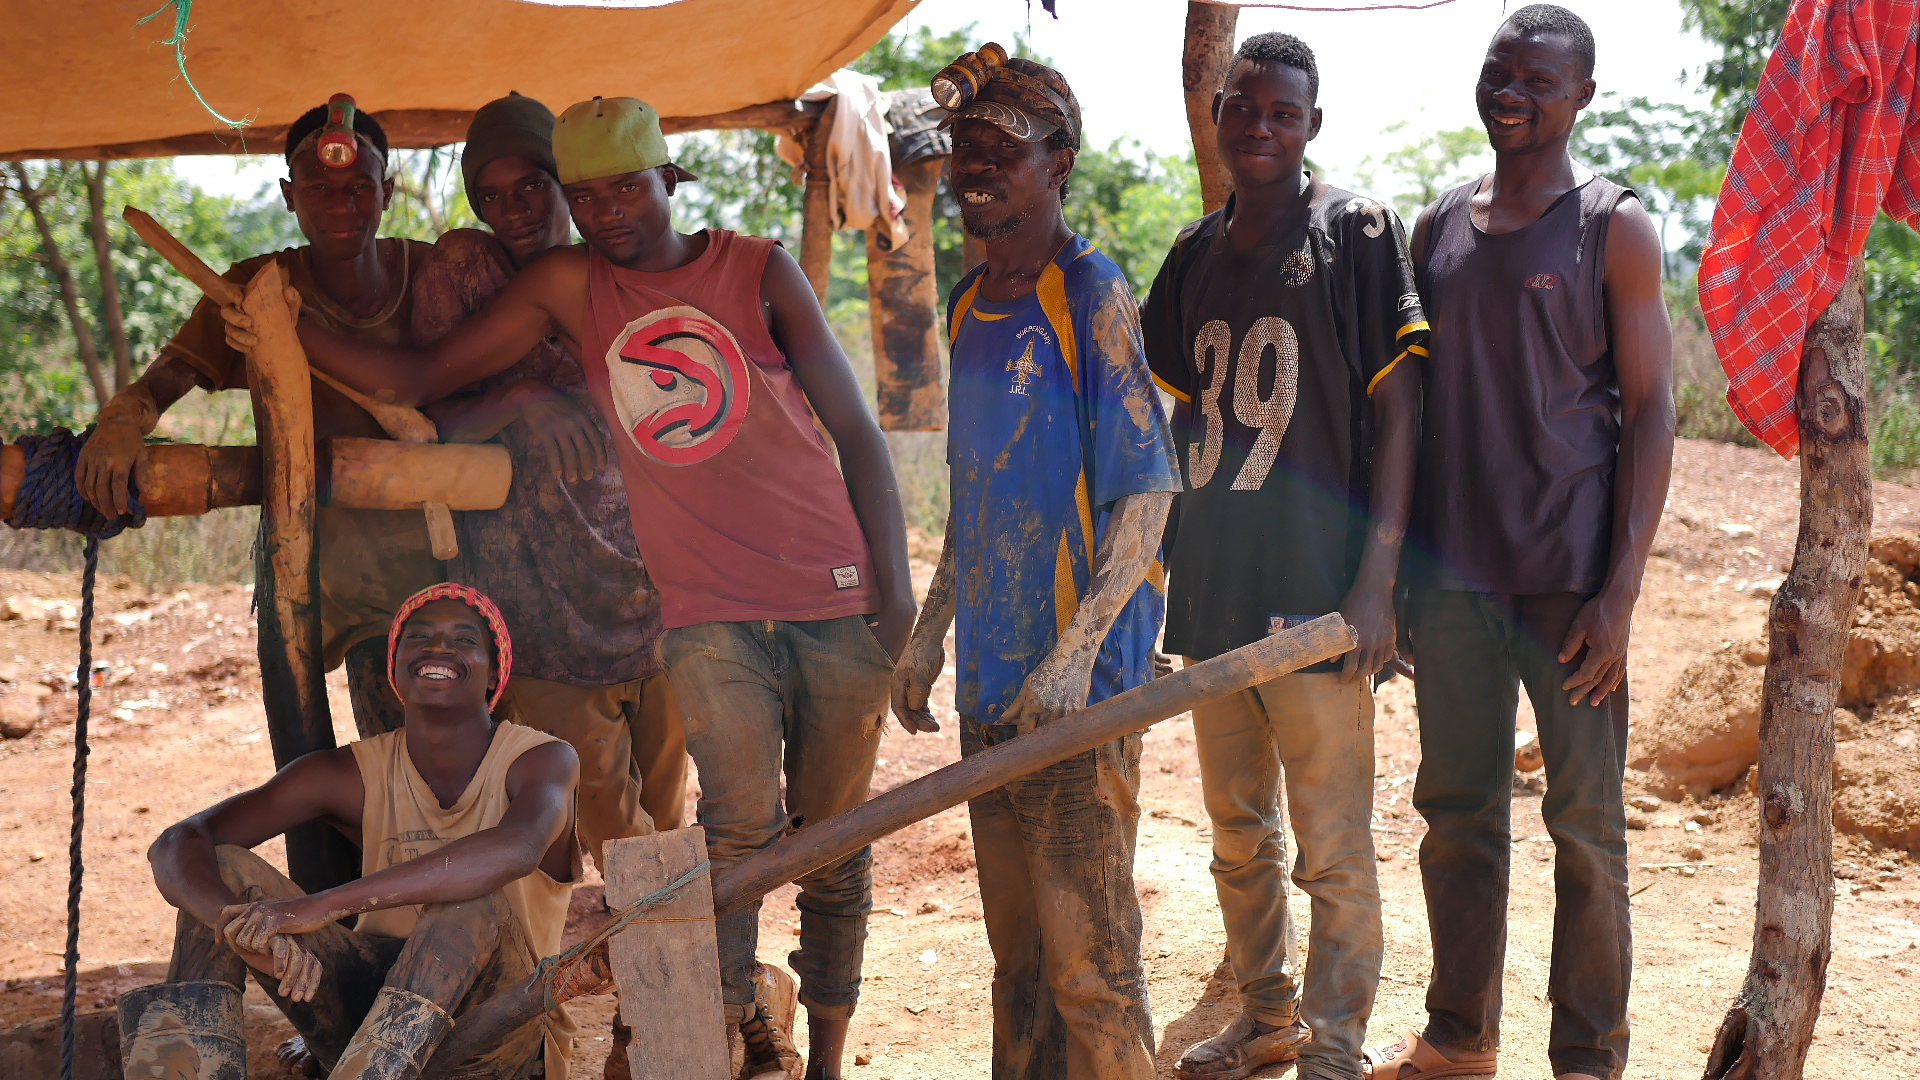 A group of small scale miners in Tanzania Anna Frohn Pedersen